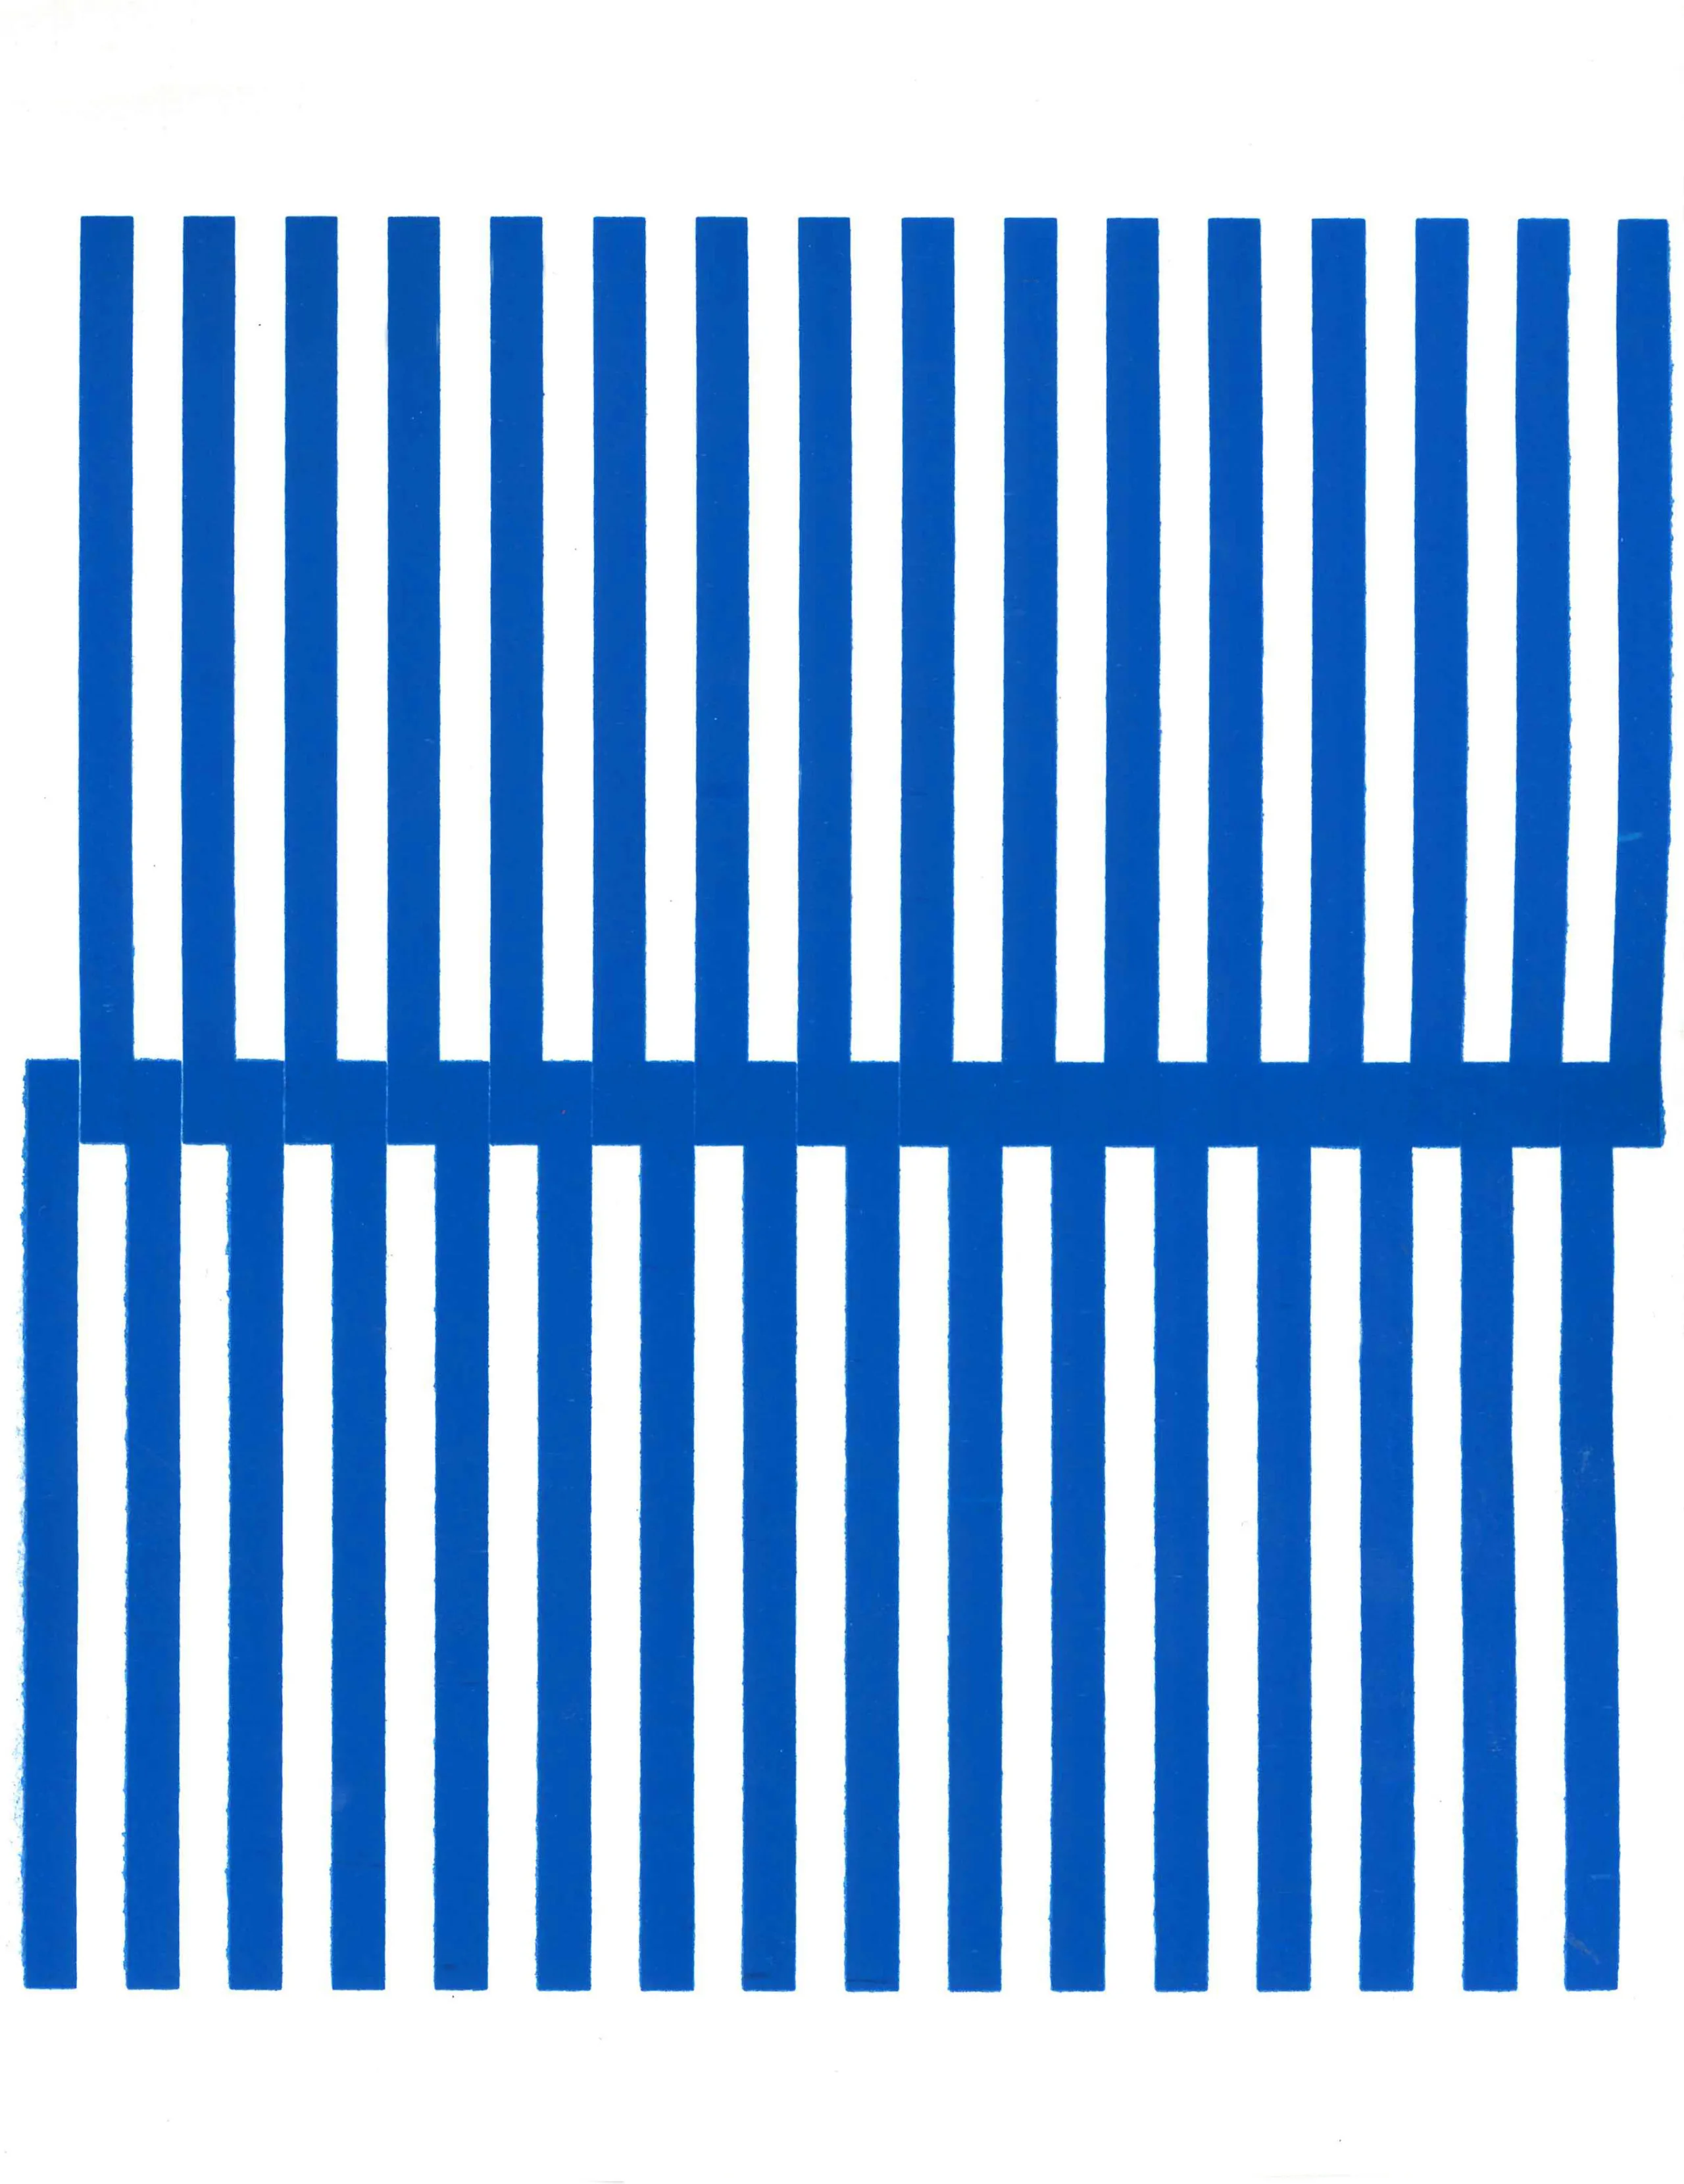 image of lines experiment